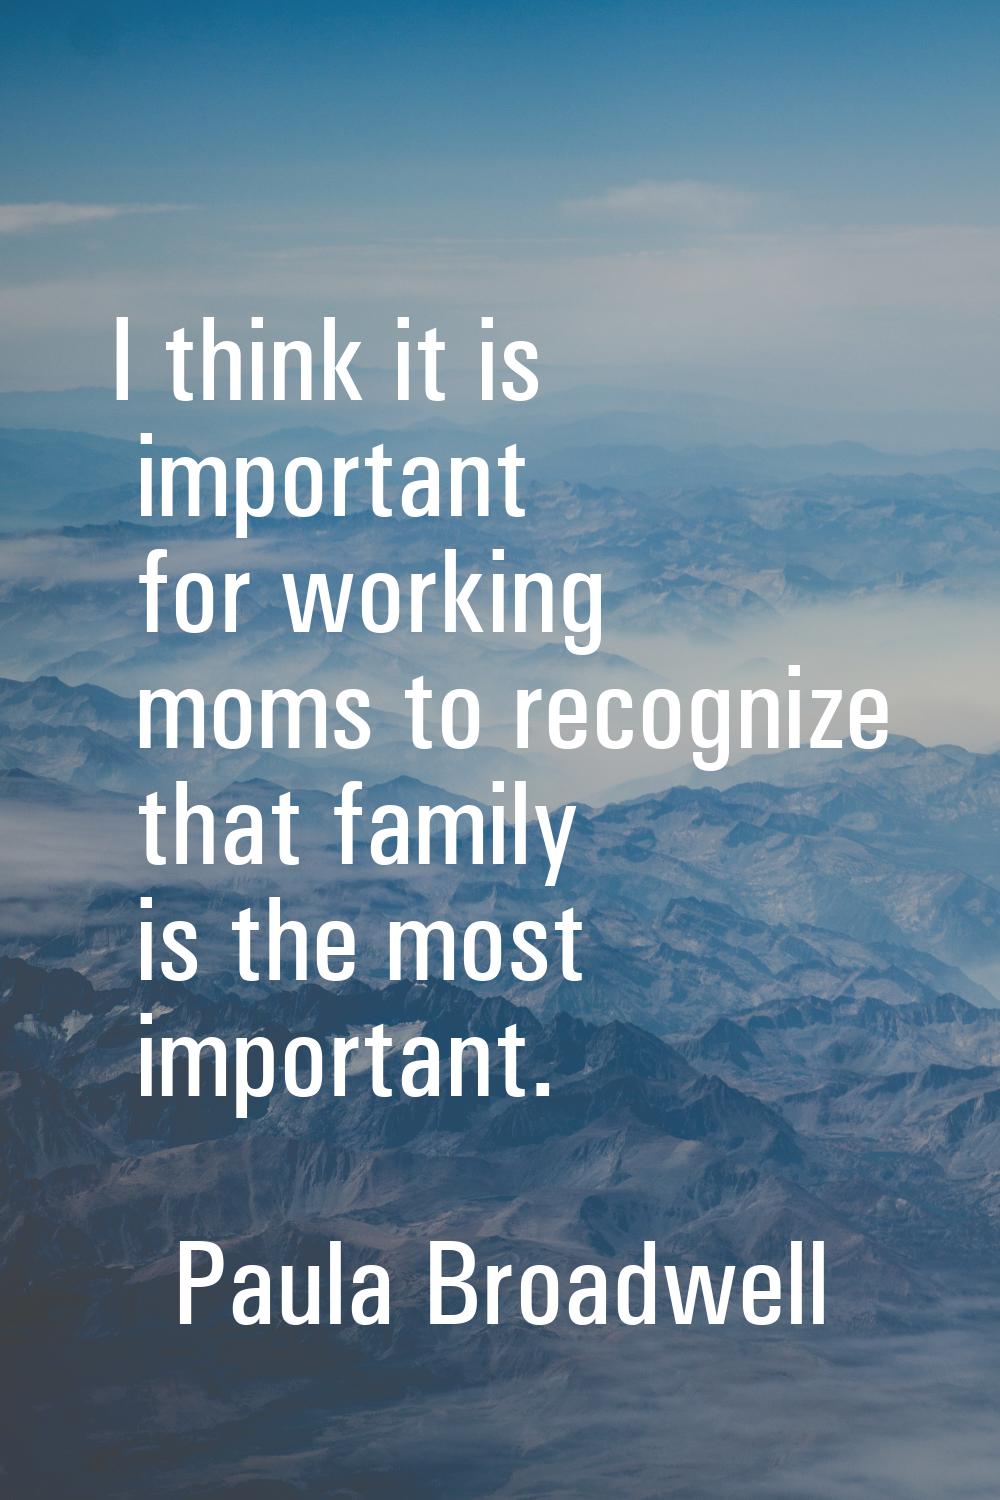 I think it is important for working moms to recognize that family is the most important.